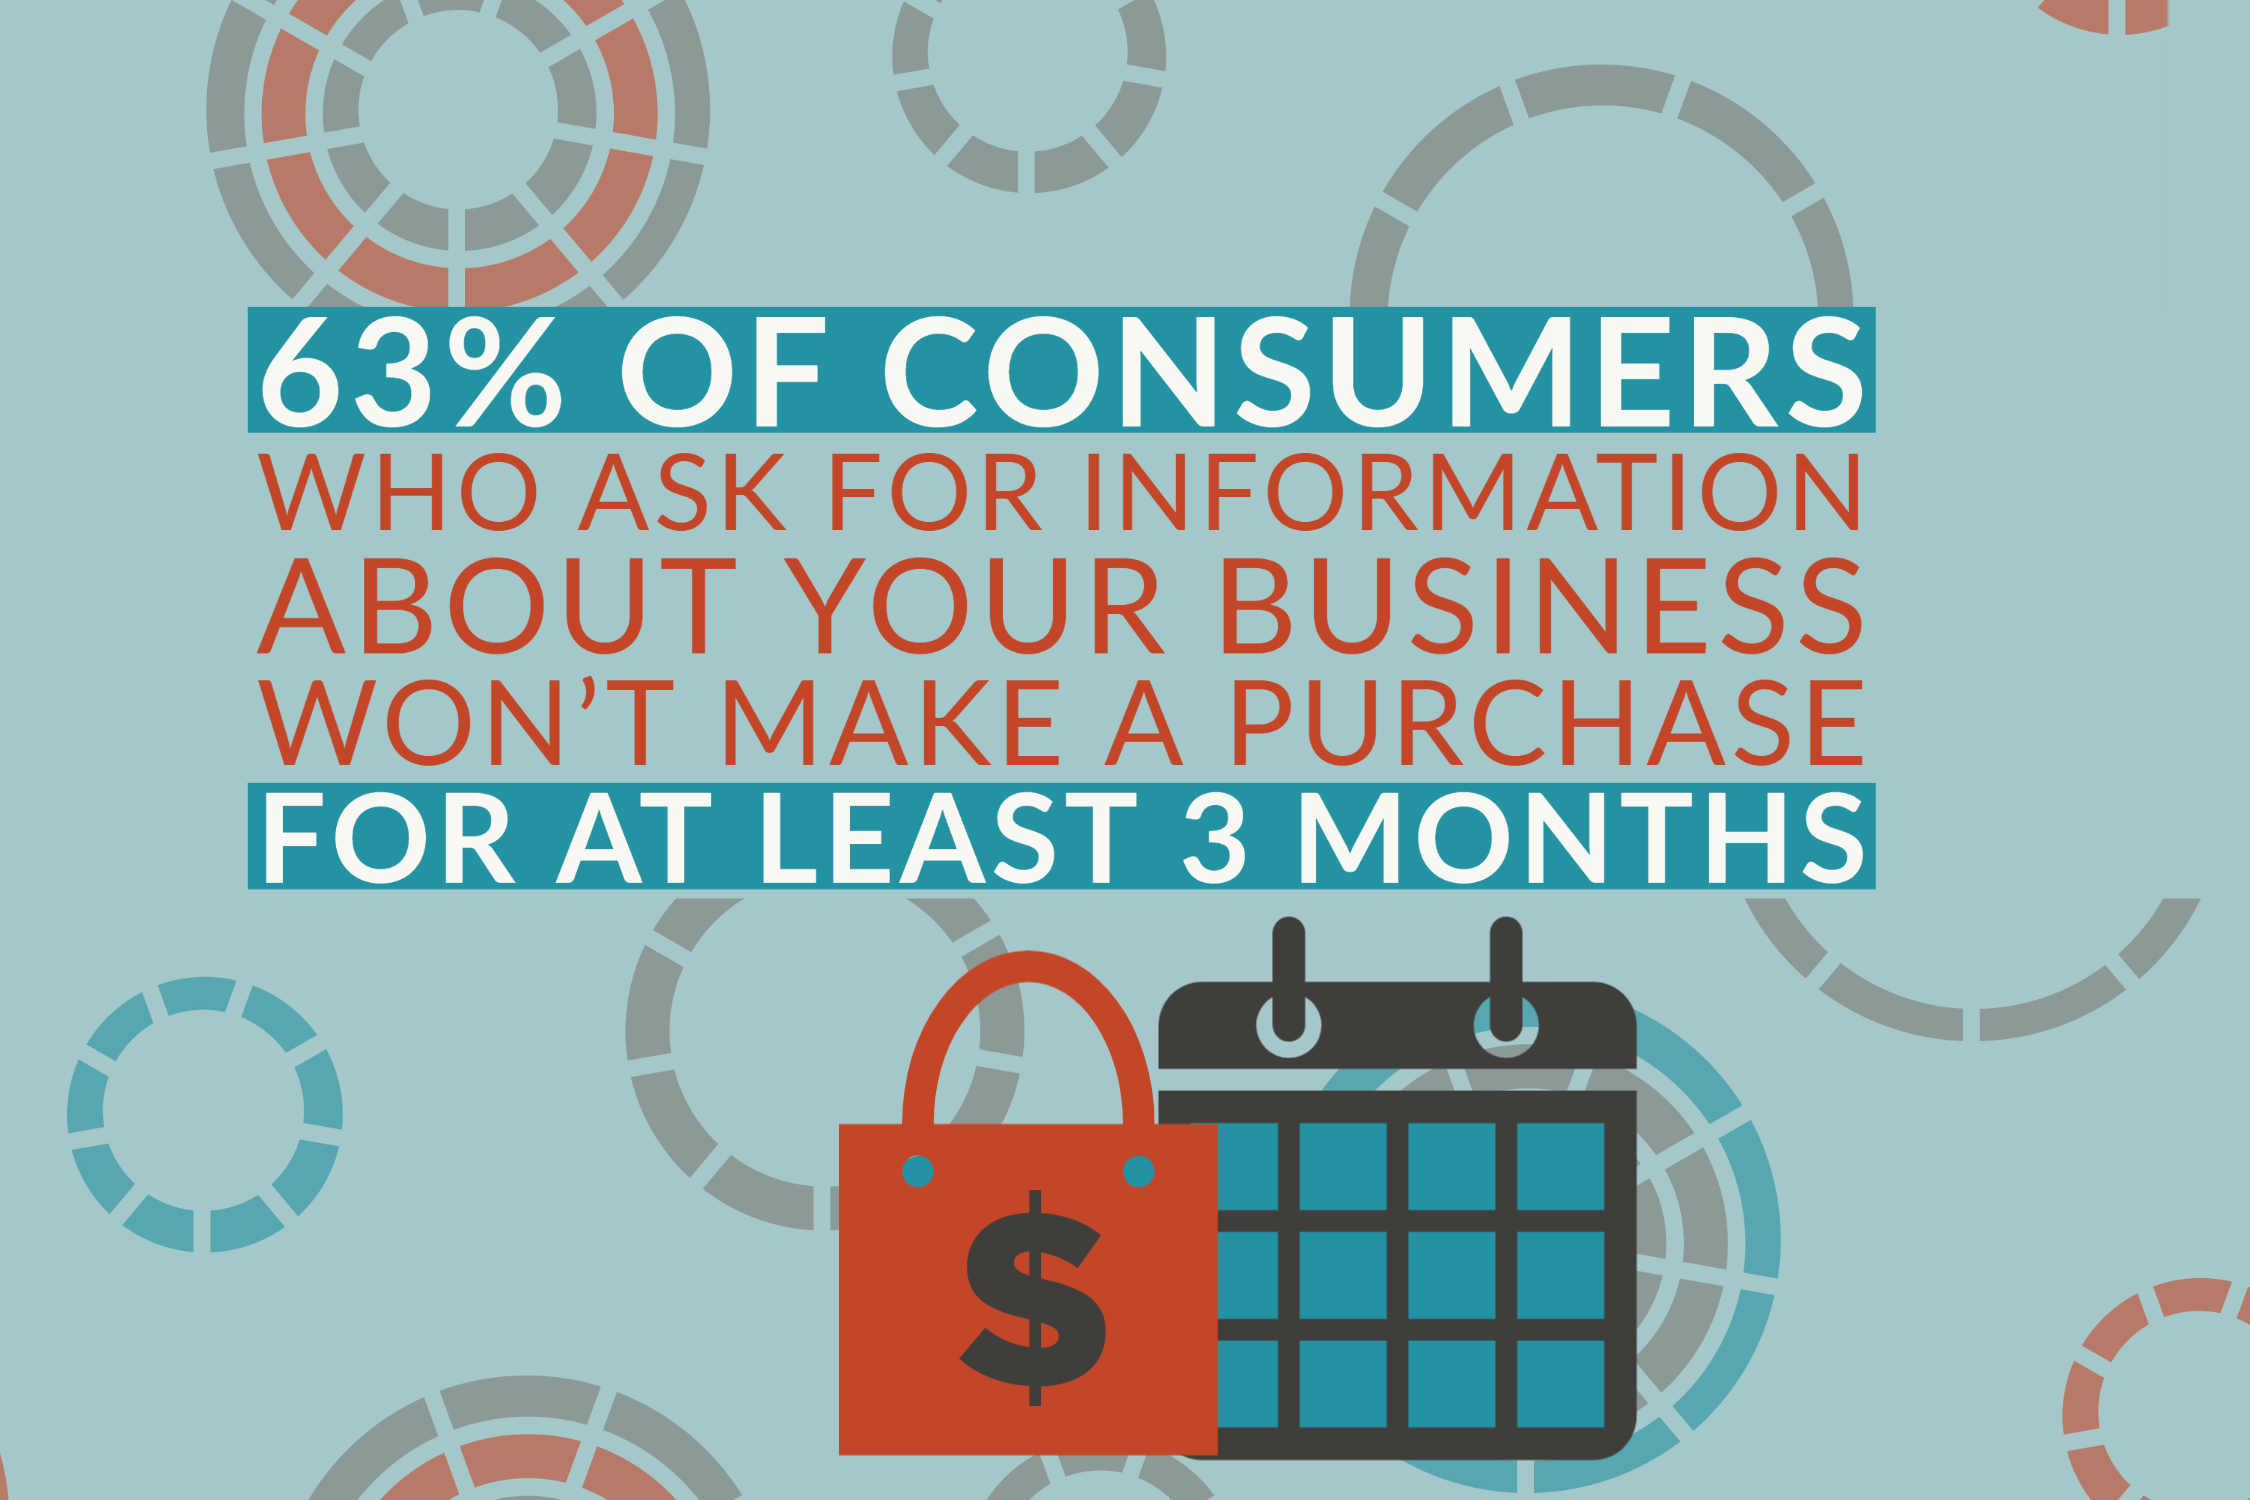 63% of consumers who ask for information about your company won't make a purchase for at least 3 months